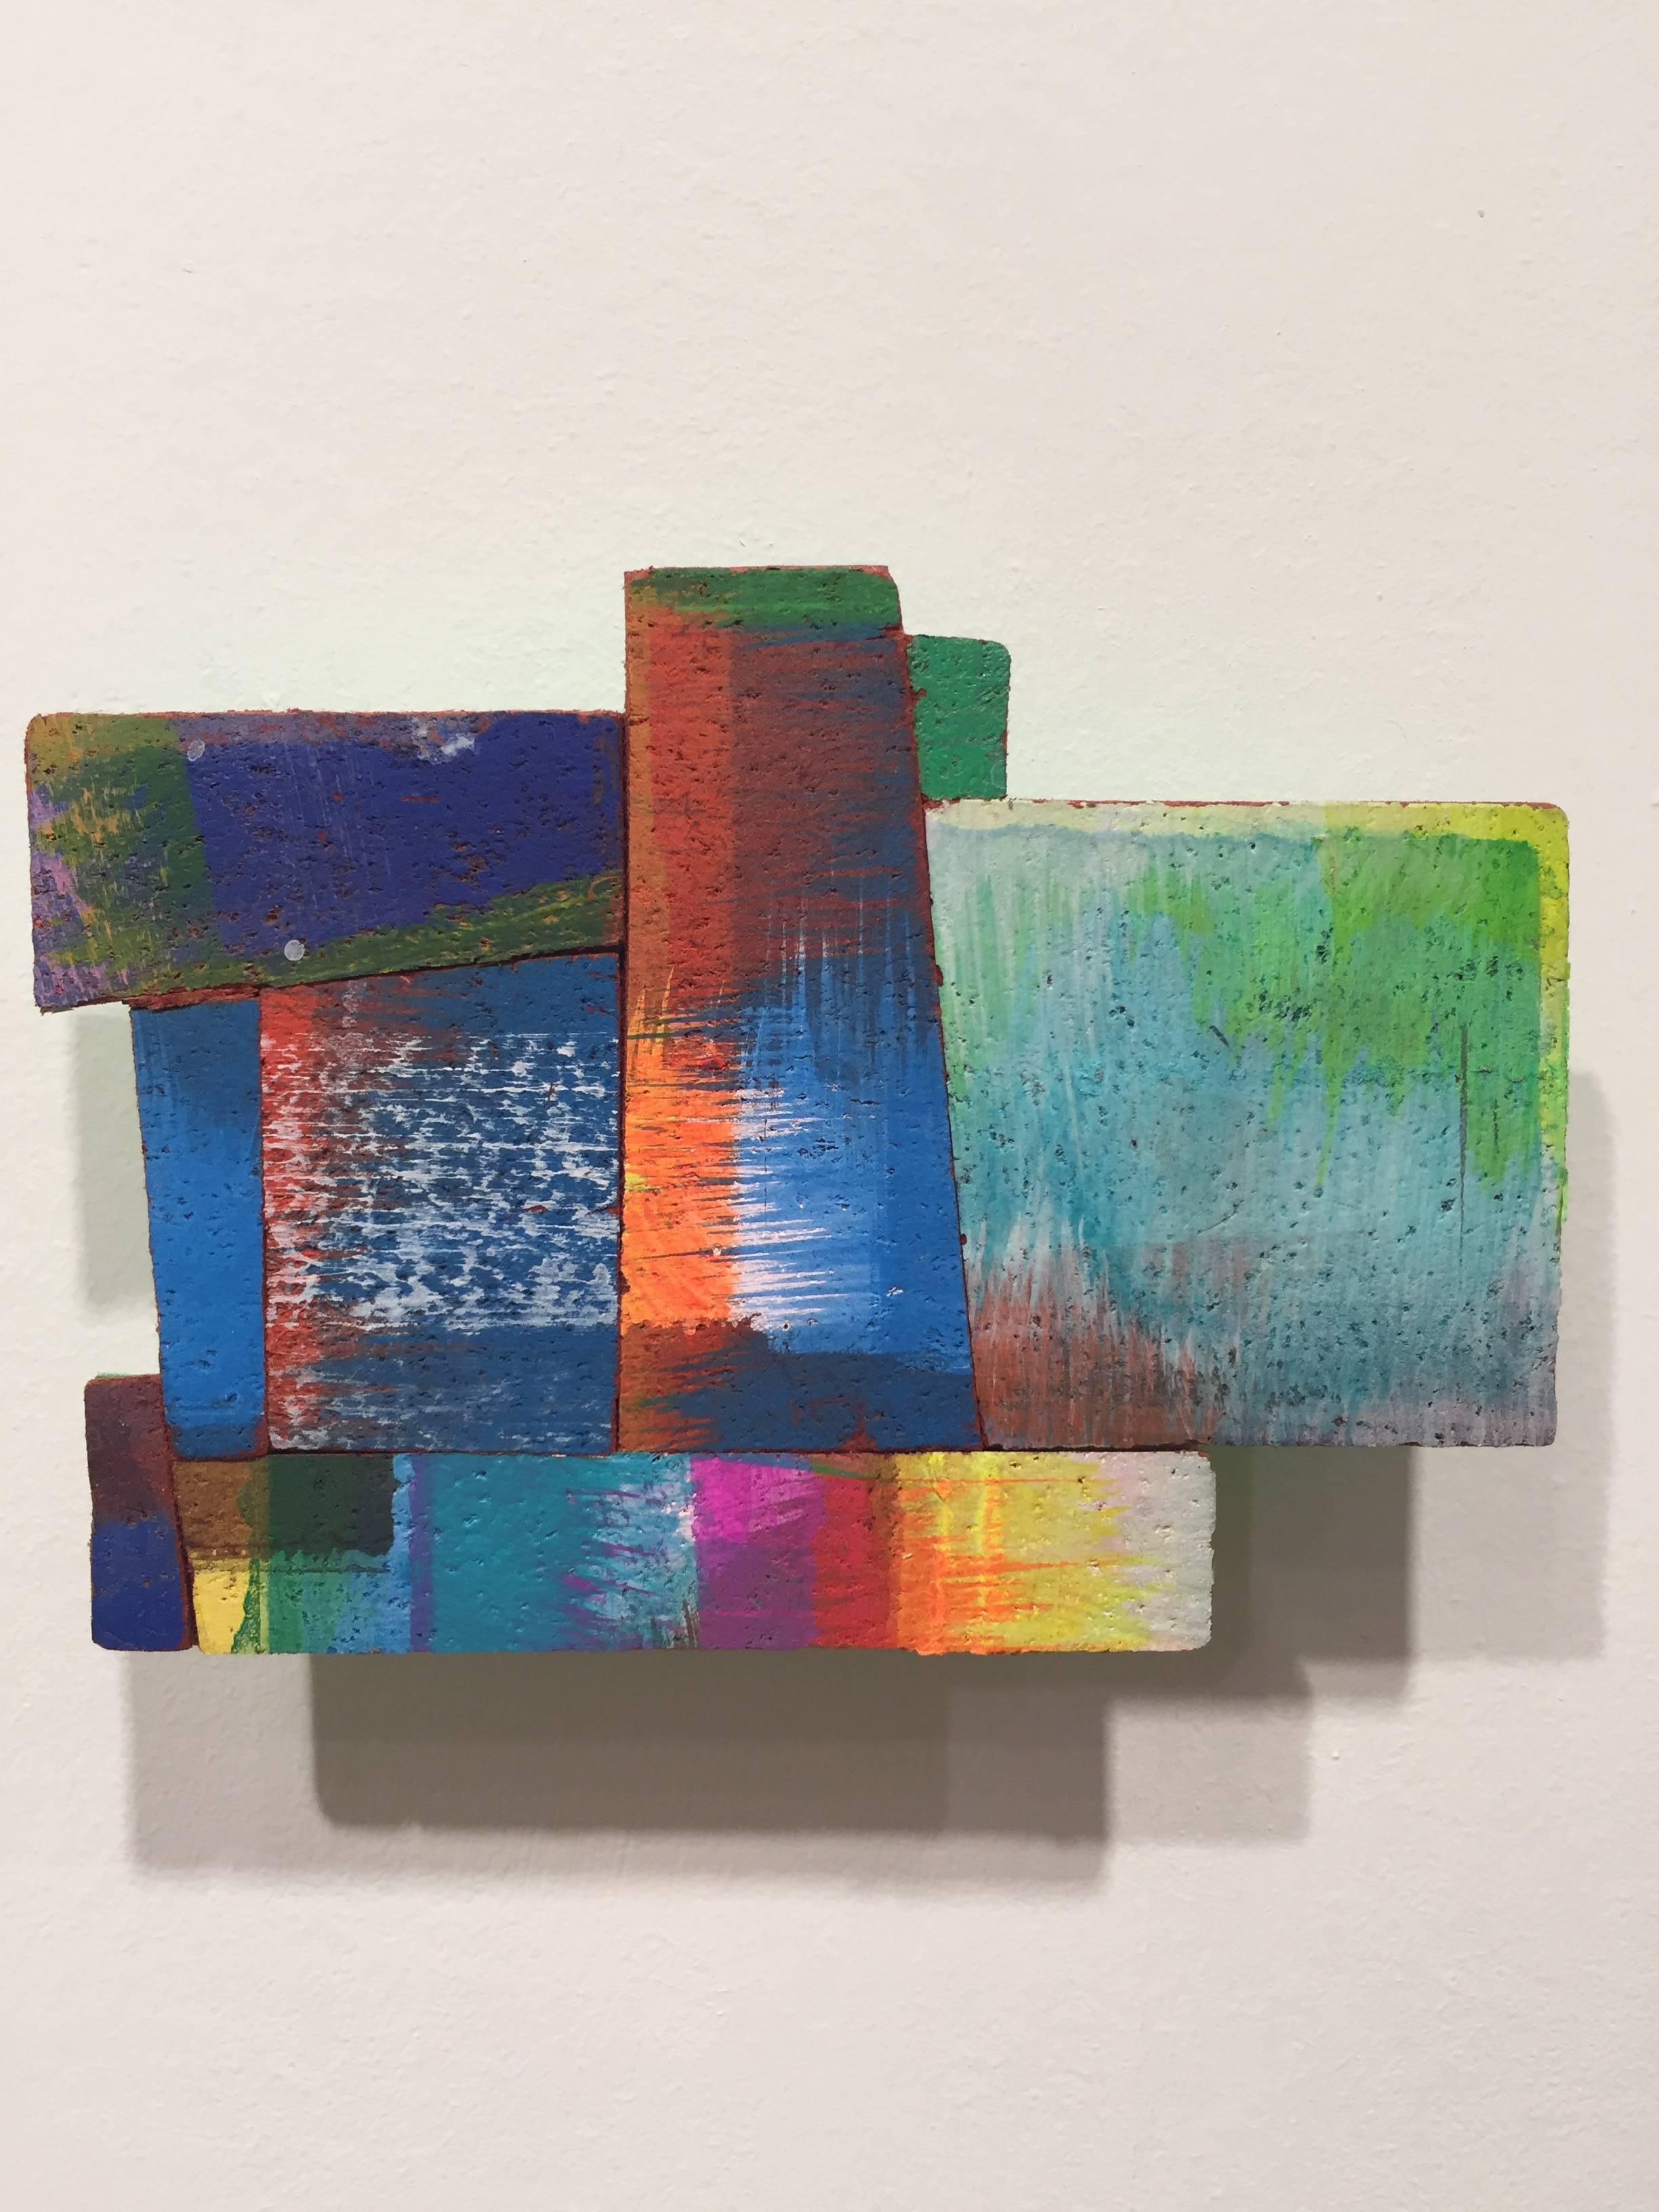 Detritus #2, multicolored acrylic on pressed wood abstract wall sculpture, 2015